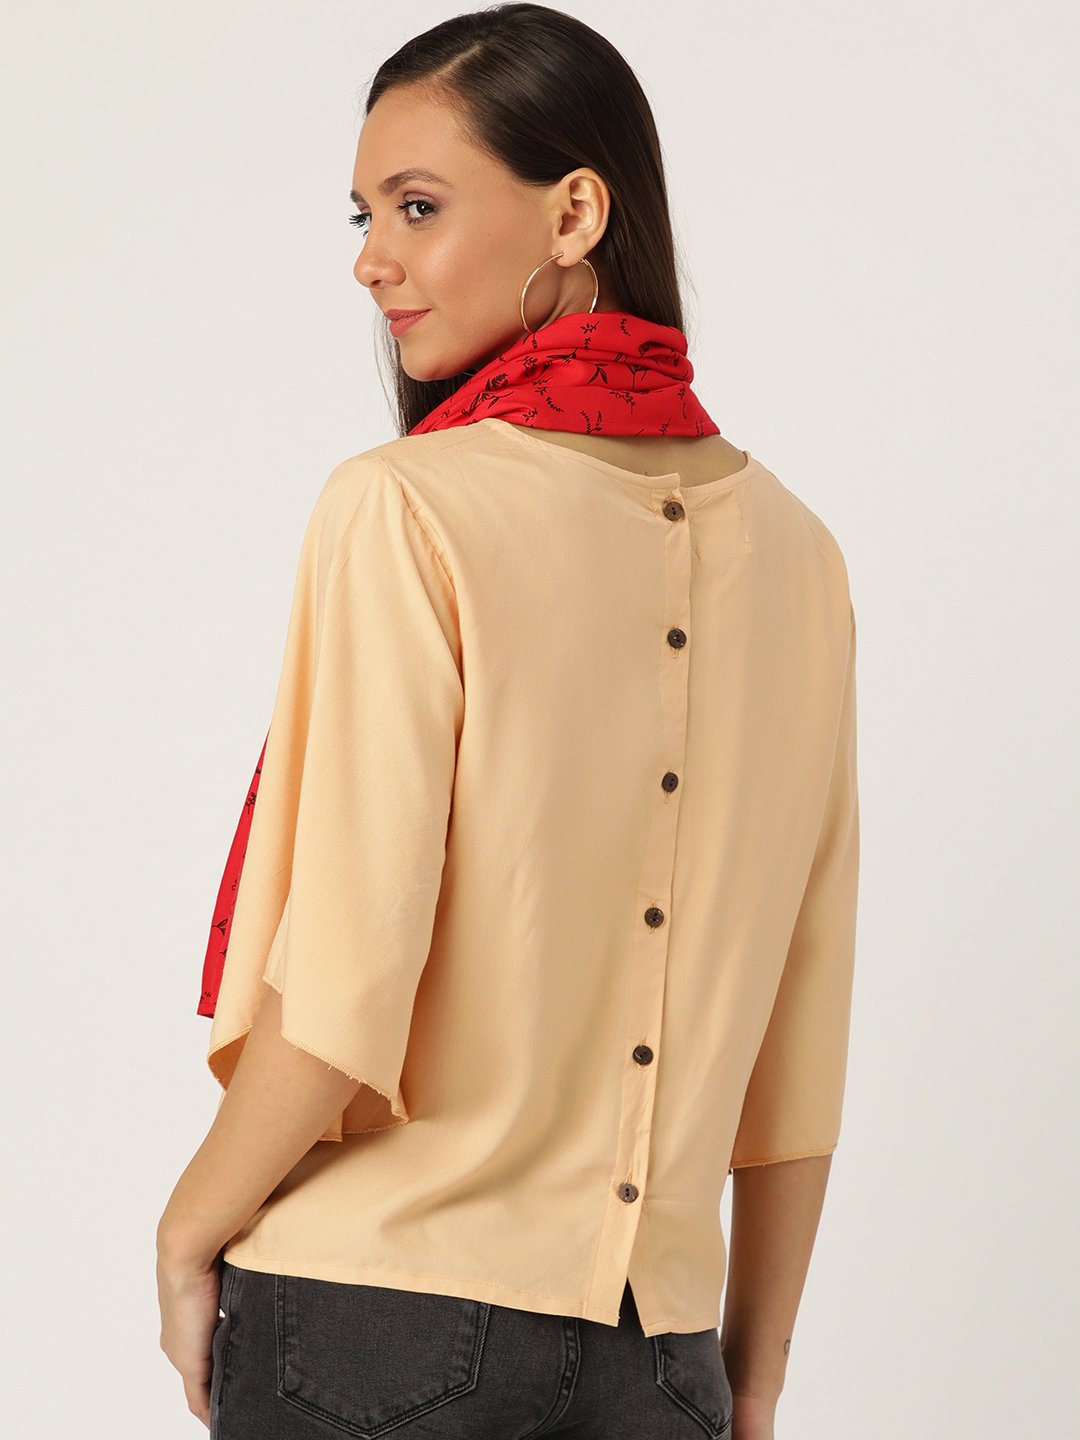 Beige Top With Red Stole